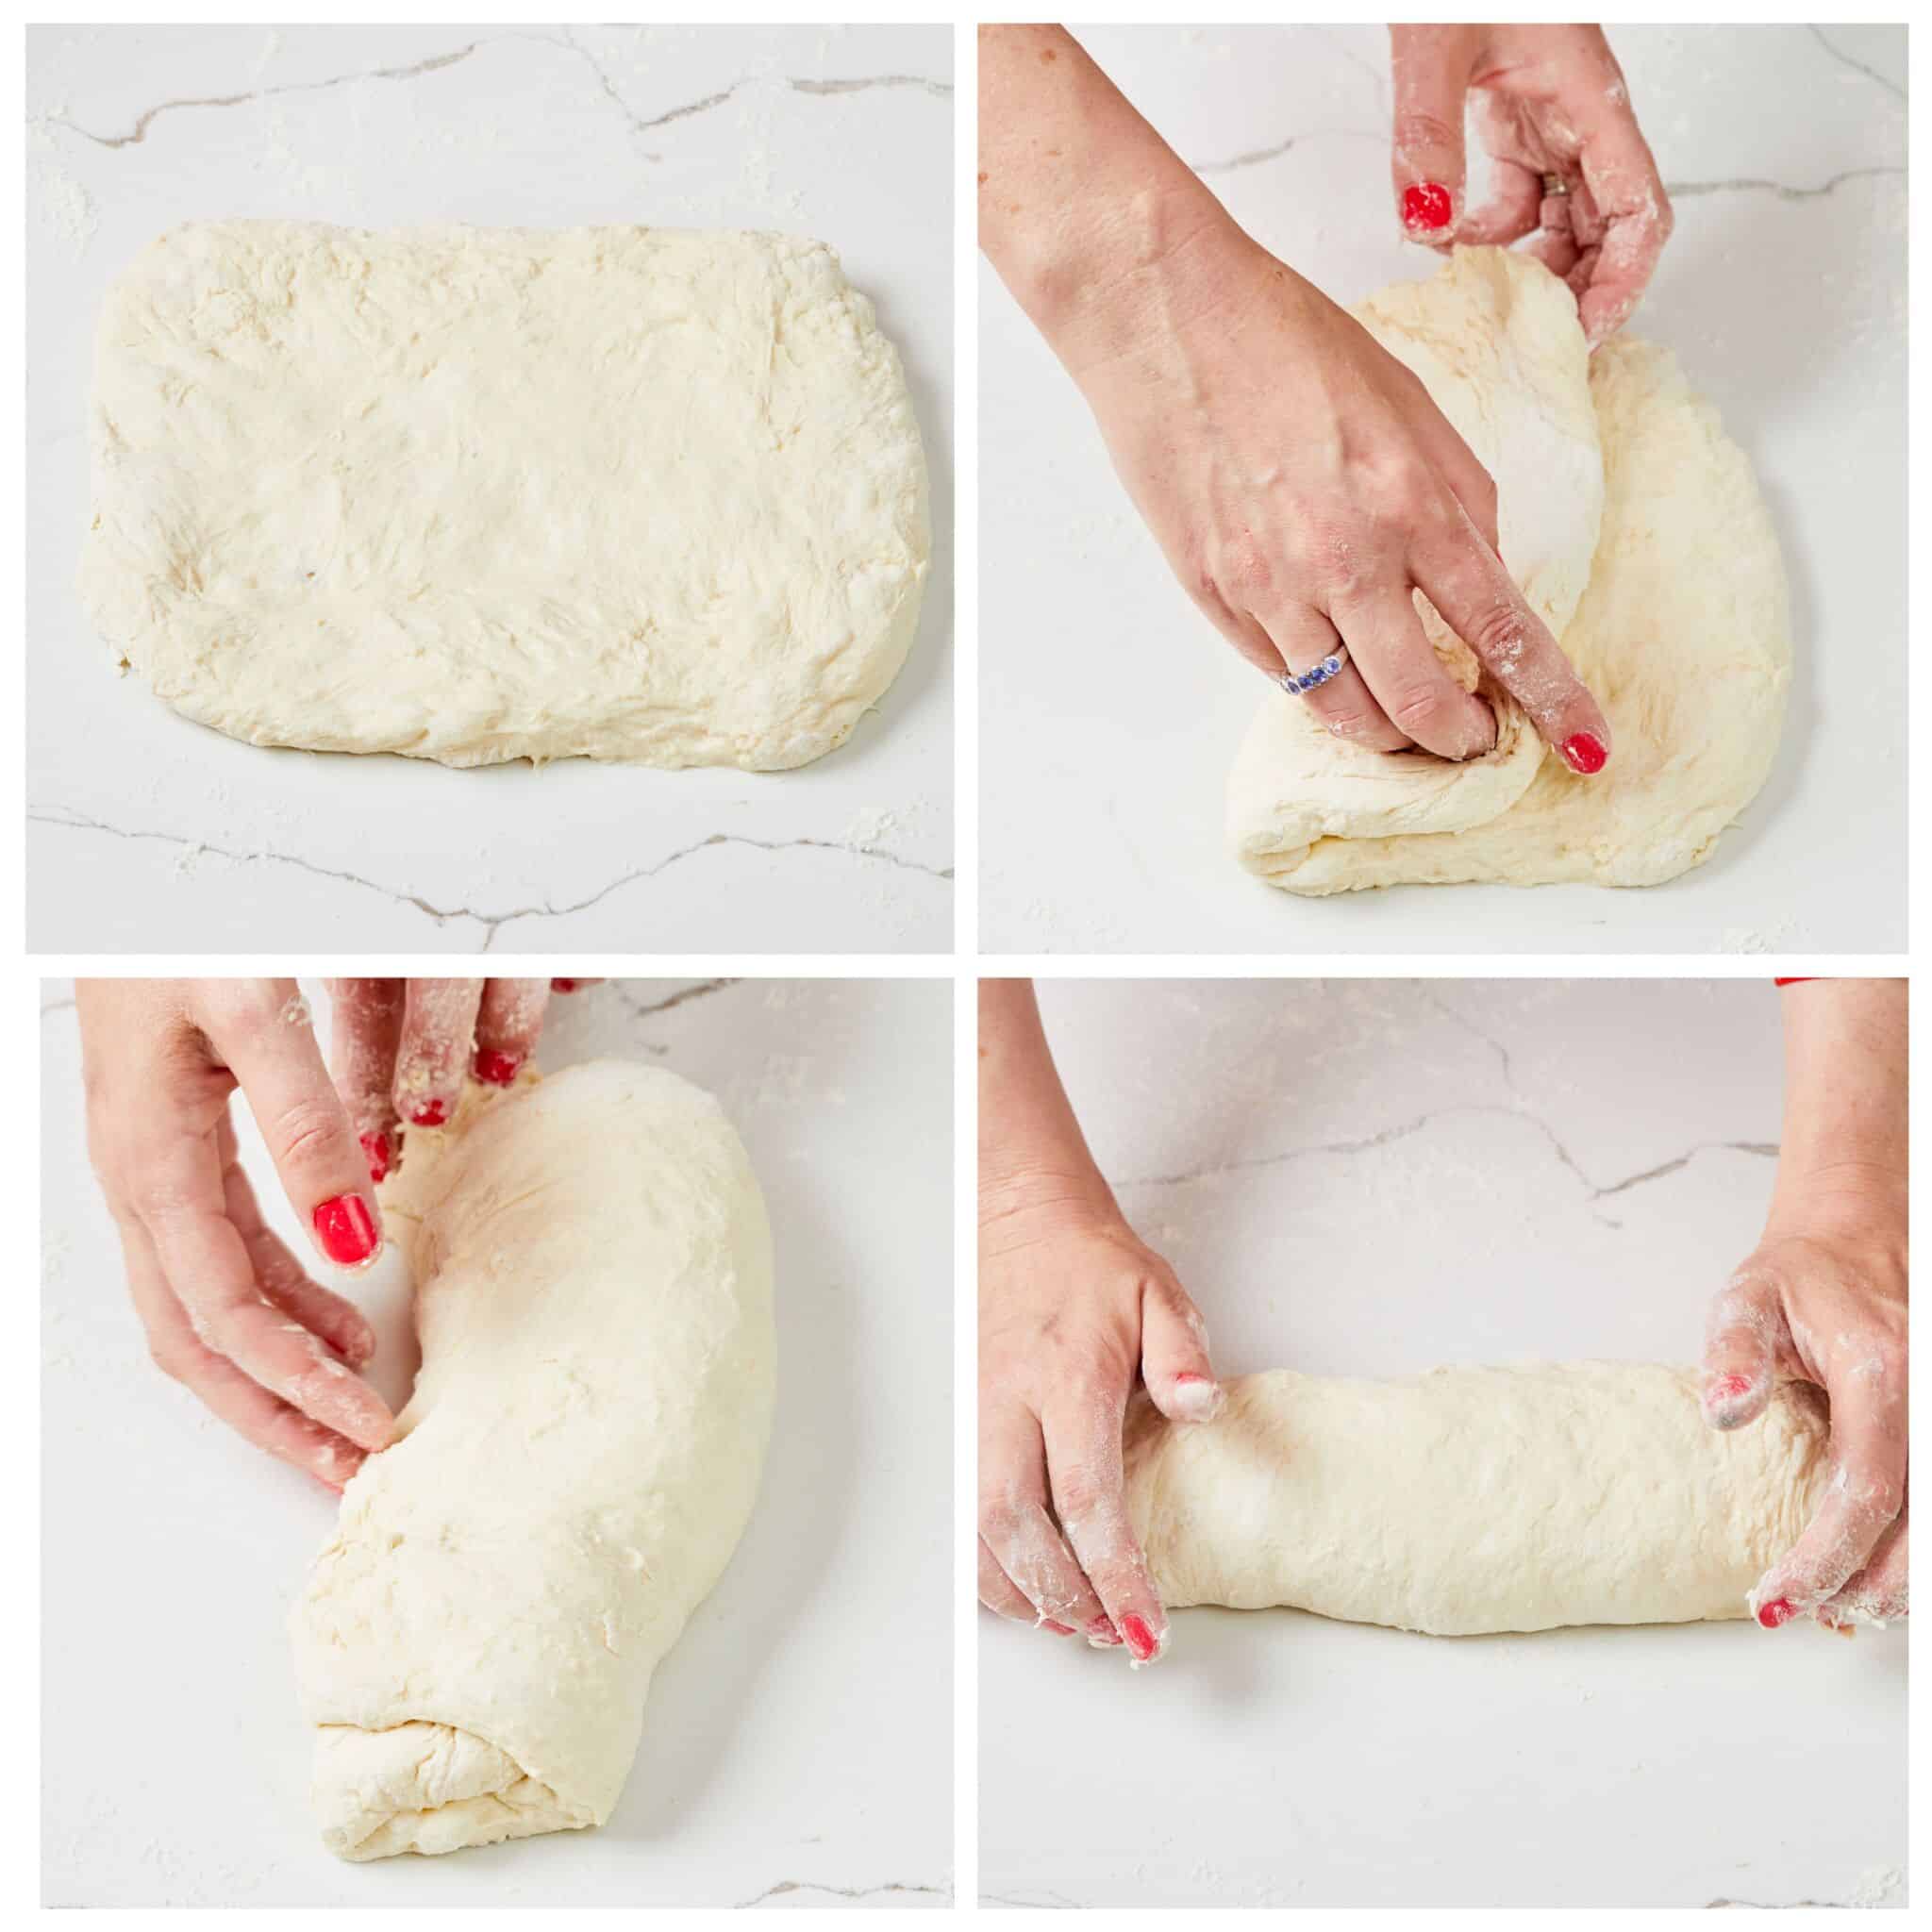 Shaping the dough: On a floured surface, starting at an 8-inch (20 cm) edge, fold in thirds like a letter, then place, seam side down into an 8x12-inch (20x30 cm) rectangle. 